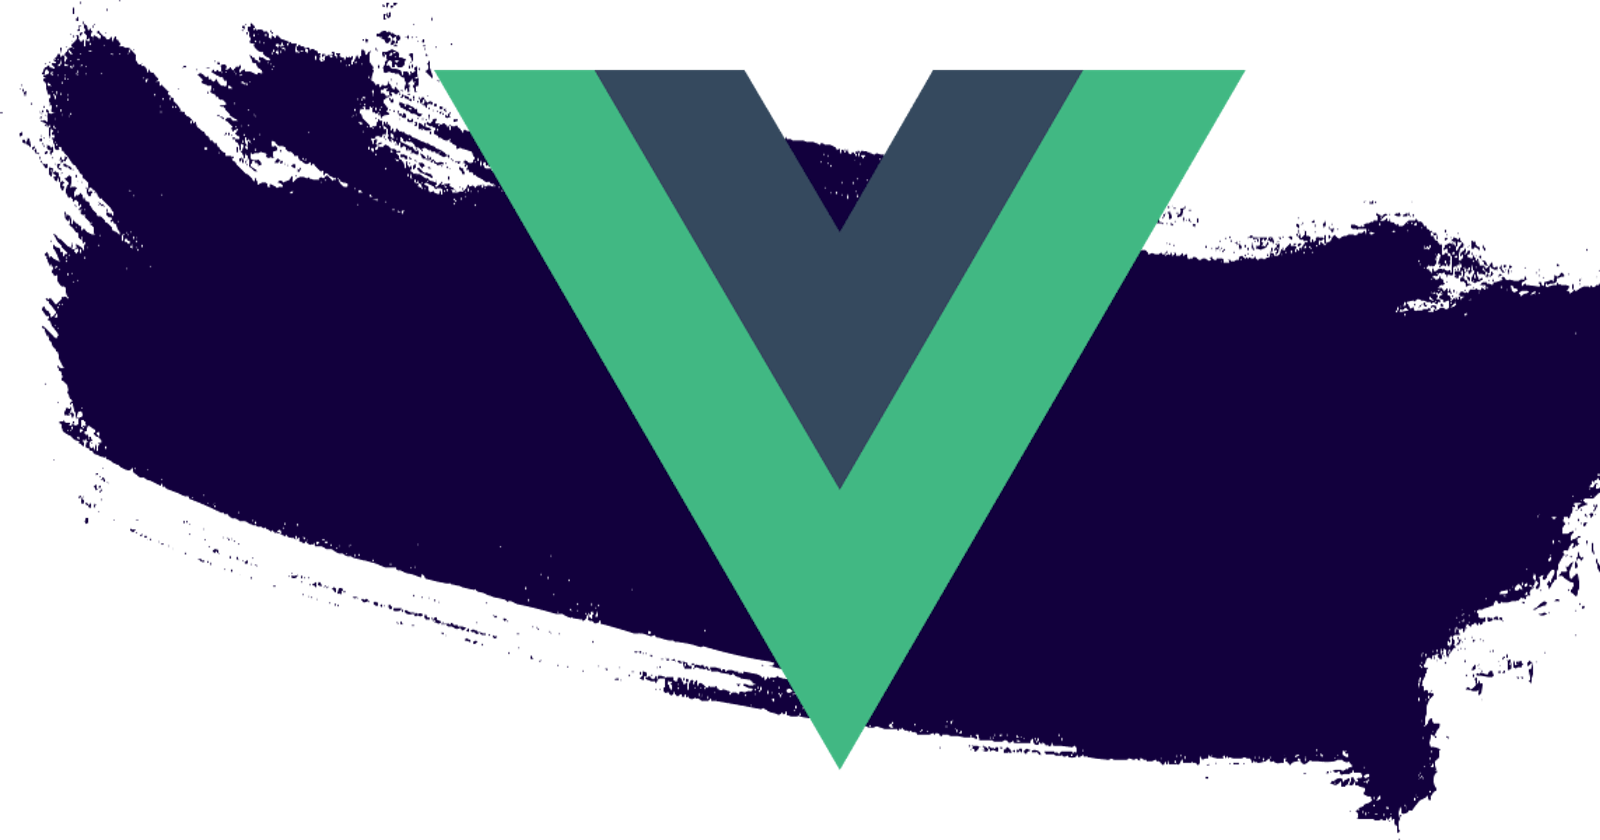 My Experience Speaking at VueConf US 2022